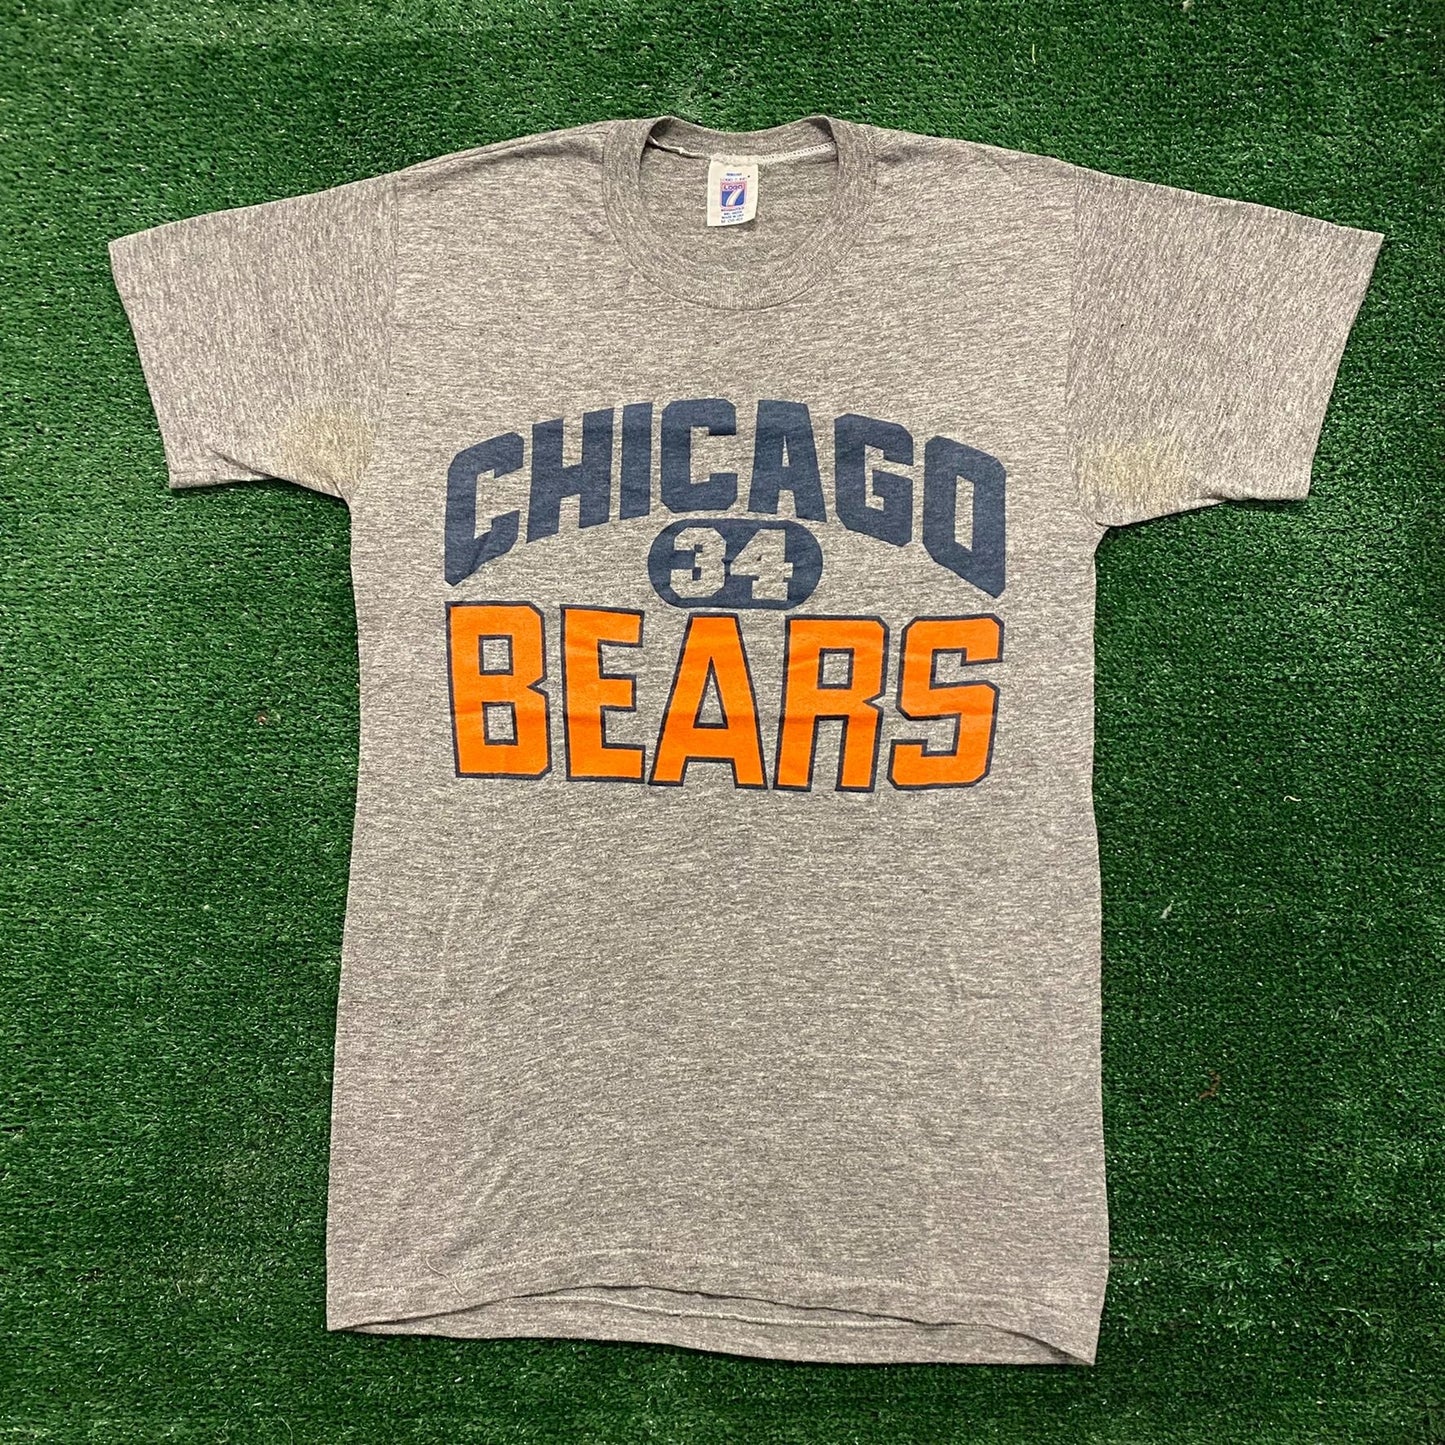 Chicago Bears 34 Football Vintage 80s Sports T-Shirt